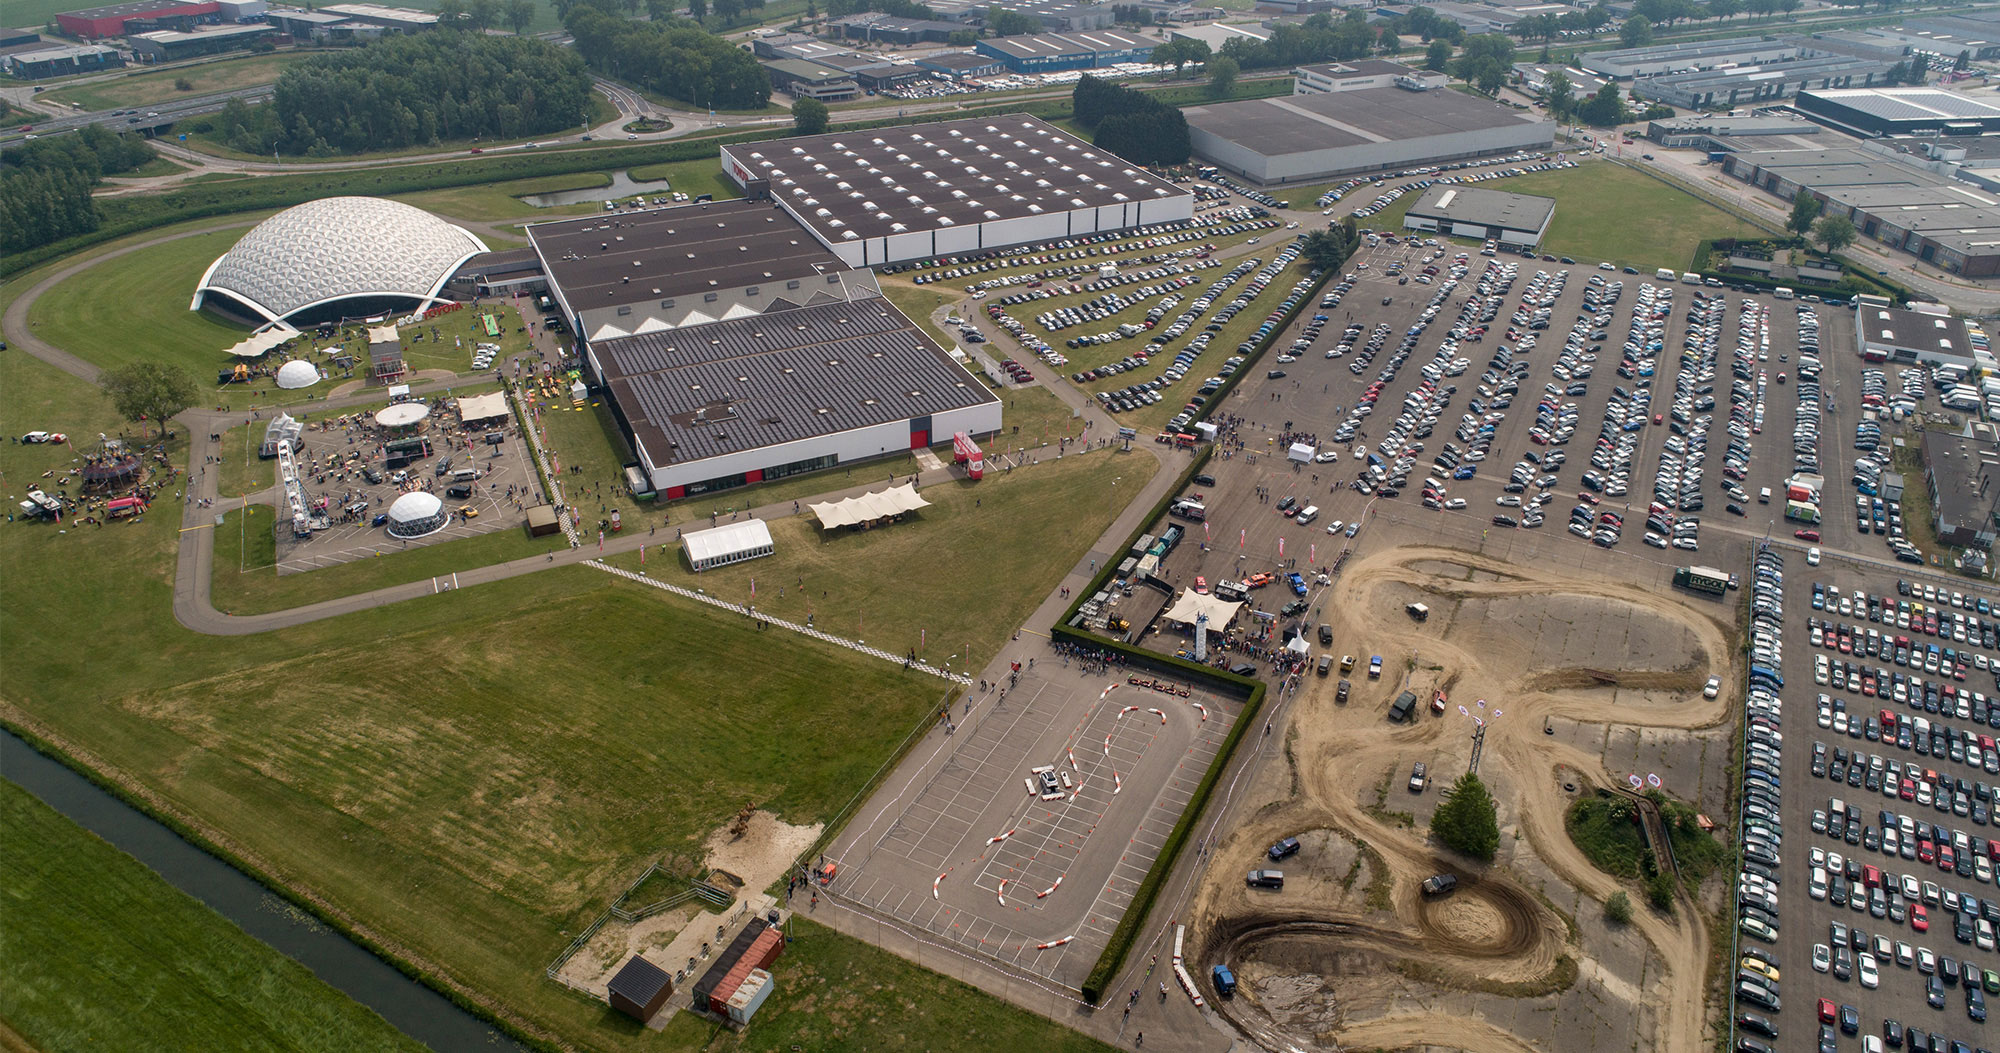 GO Toyota experience 2019 - aerial view